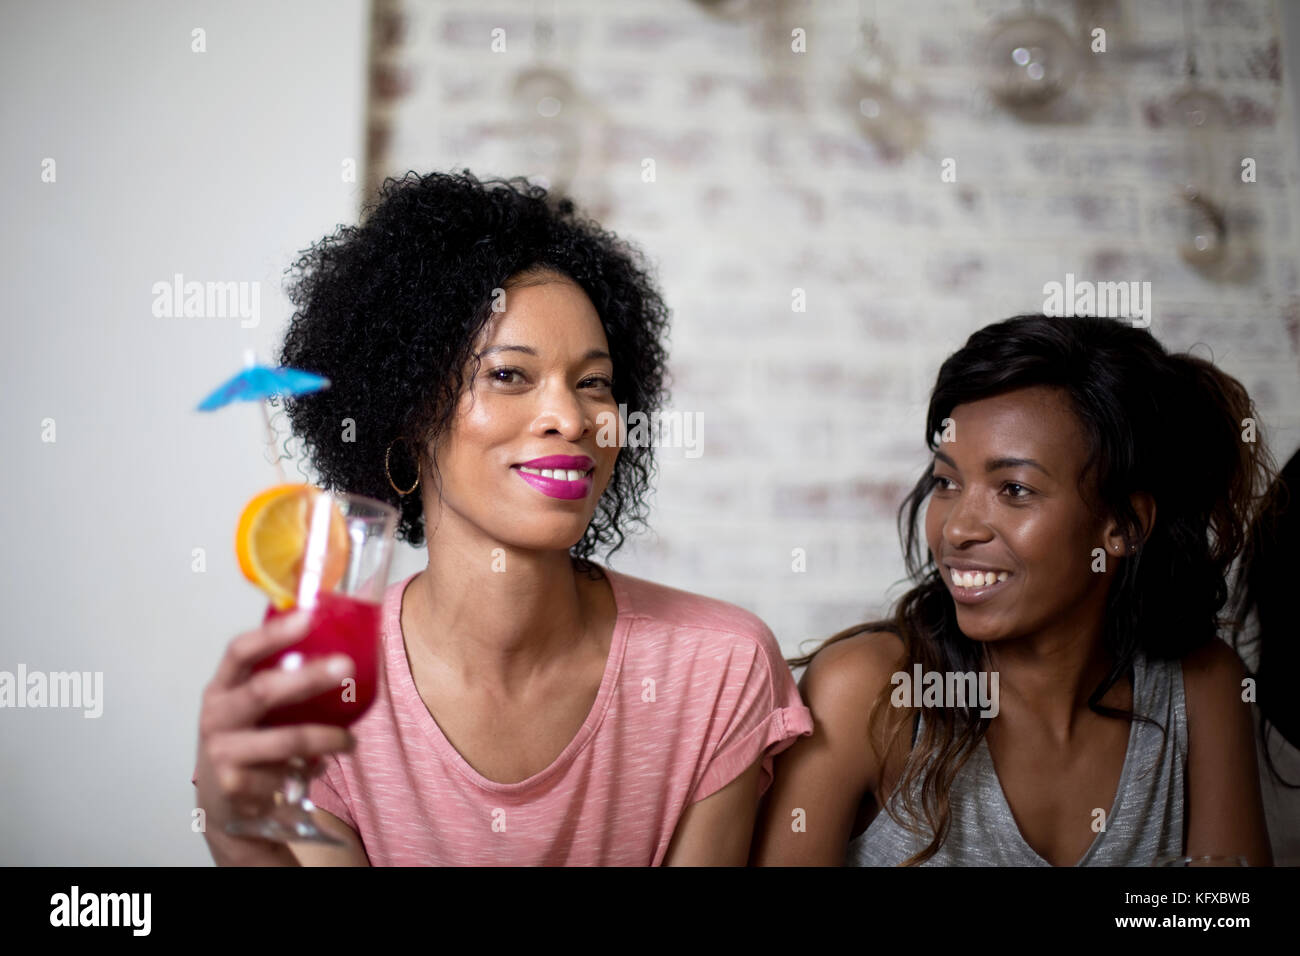 Women drinking cocktails Stock Photo